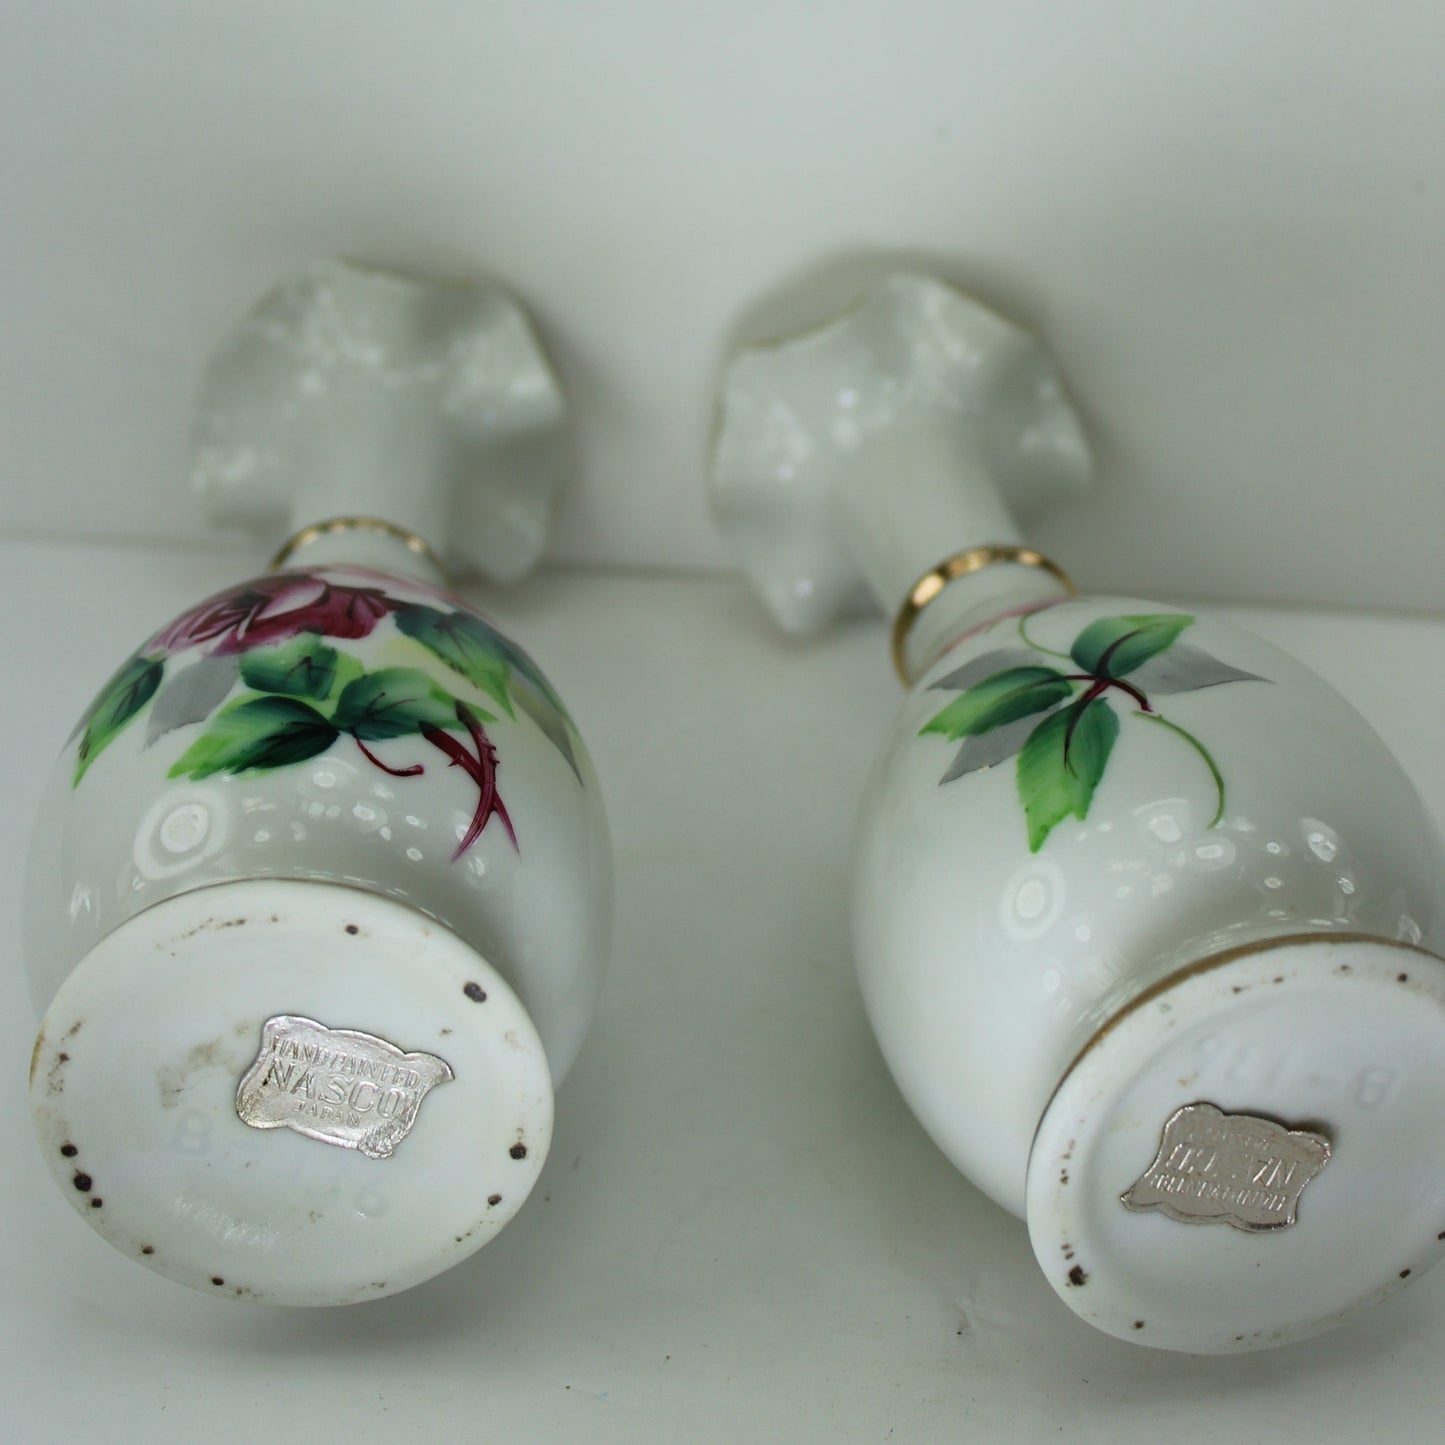 Pair Nasco Japan Vases Made Japan Roses Gilt Mid Century Hand Paint Orig Labels silver labels on both mid century style